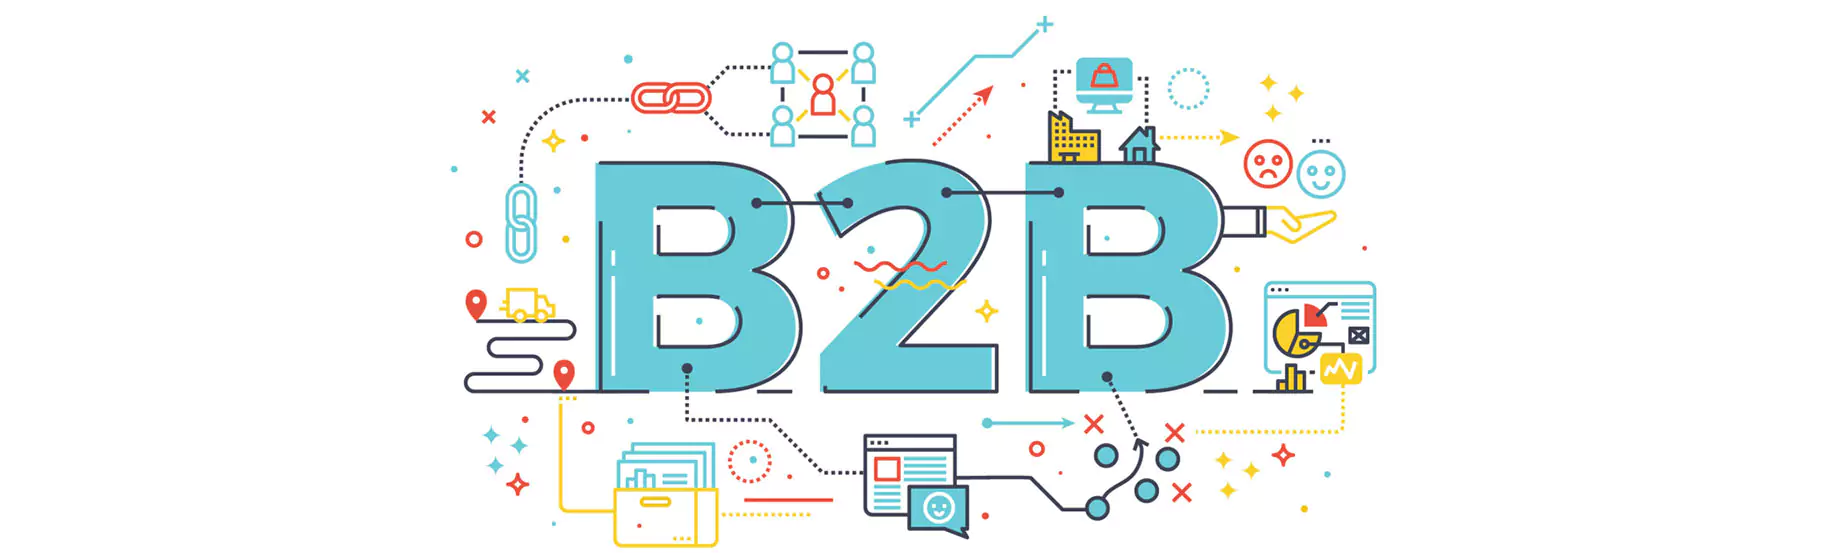 b2b-gco-business-to-business-pc